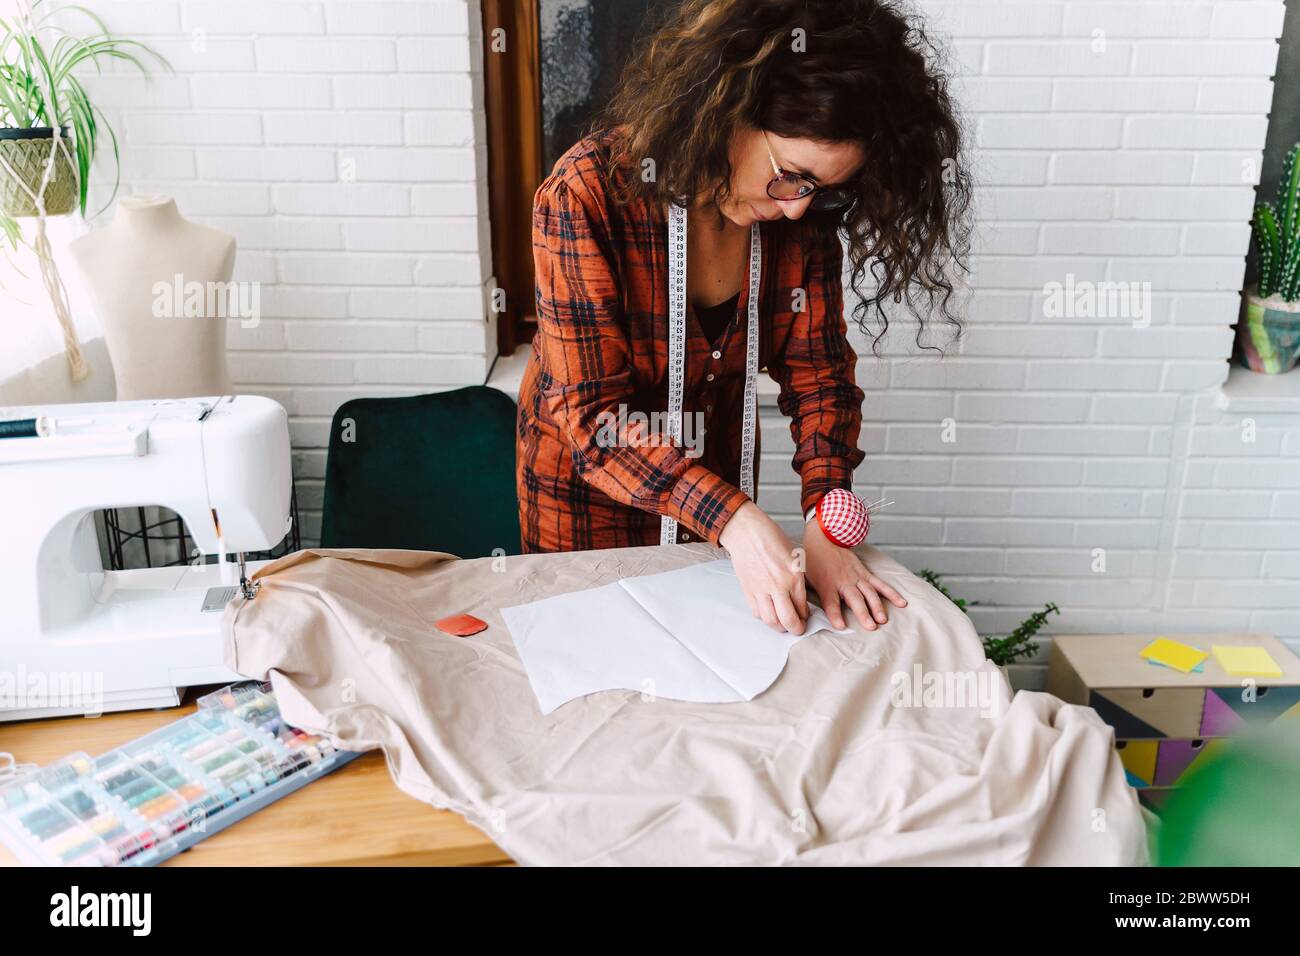 Woman pinning sewing pattern on table at home Stock Photo